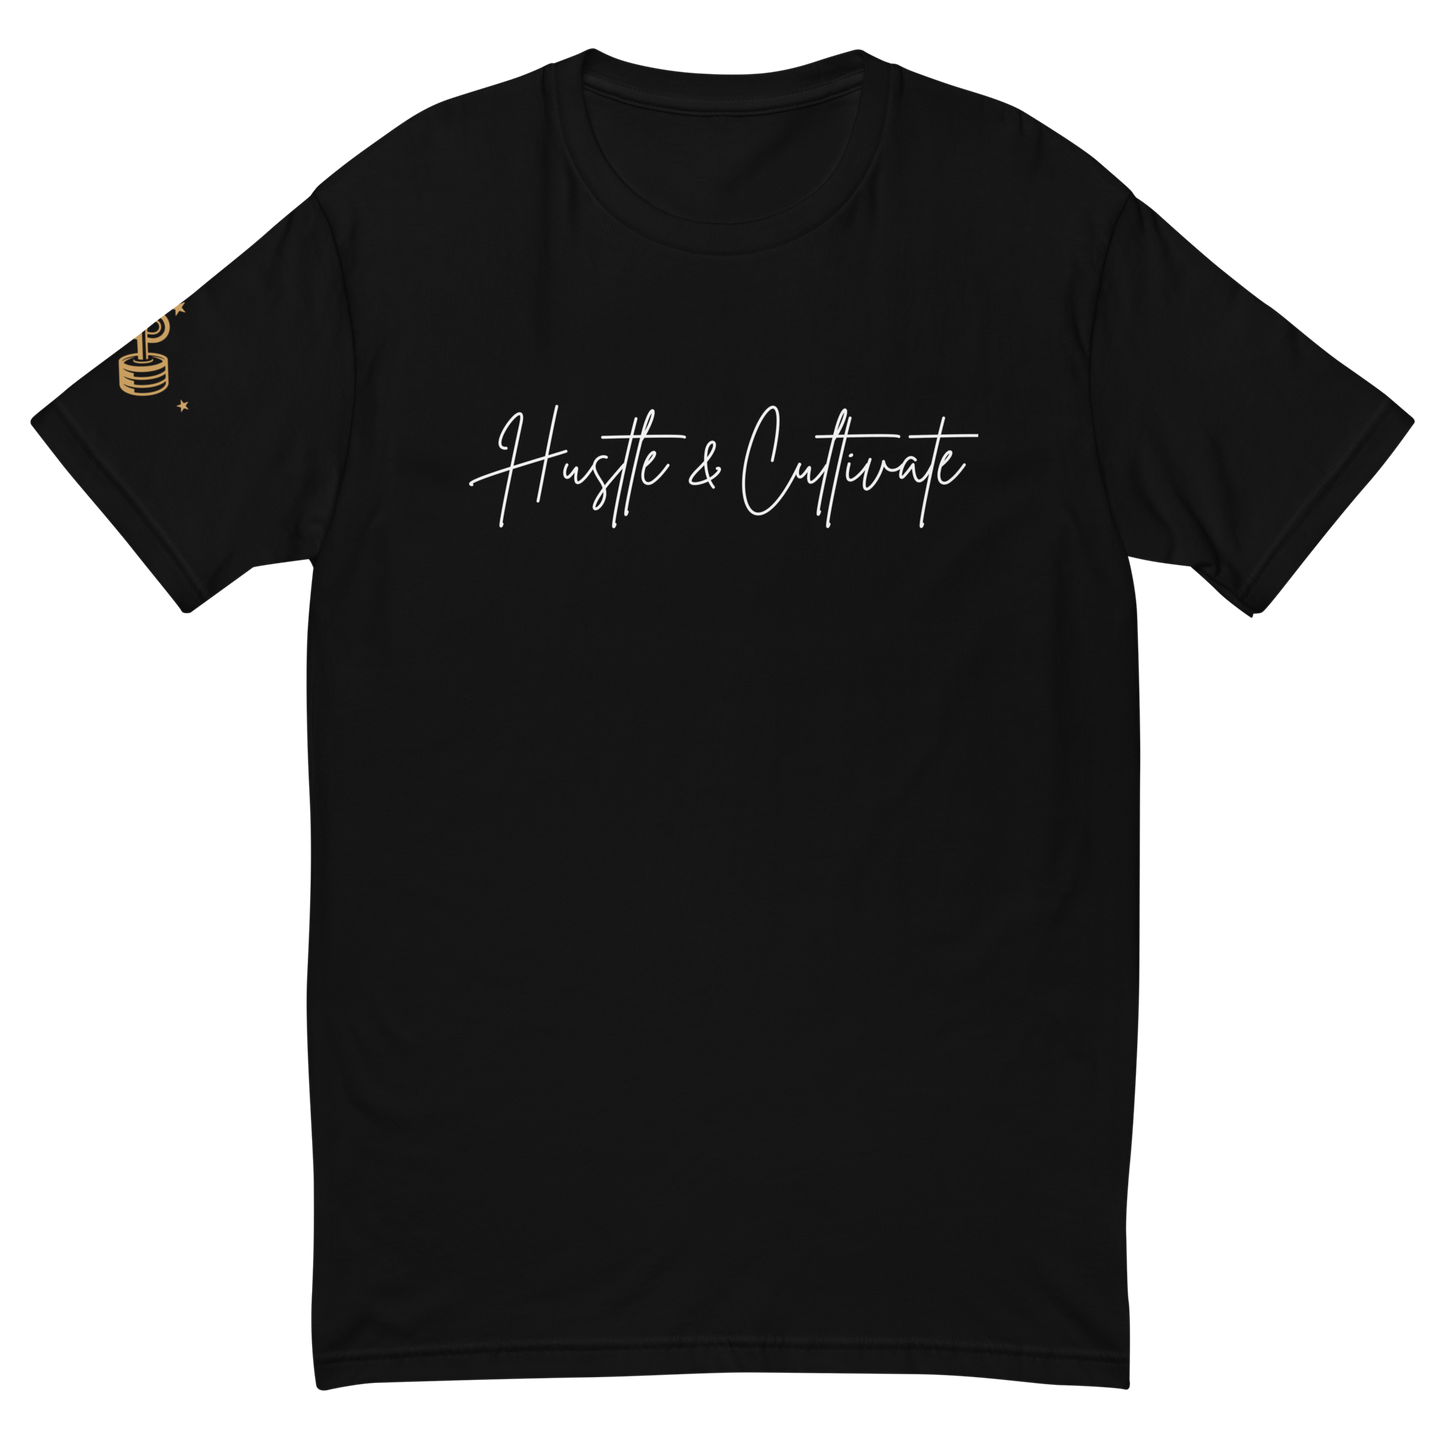 Hustle Facts Graphic T